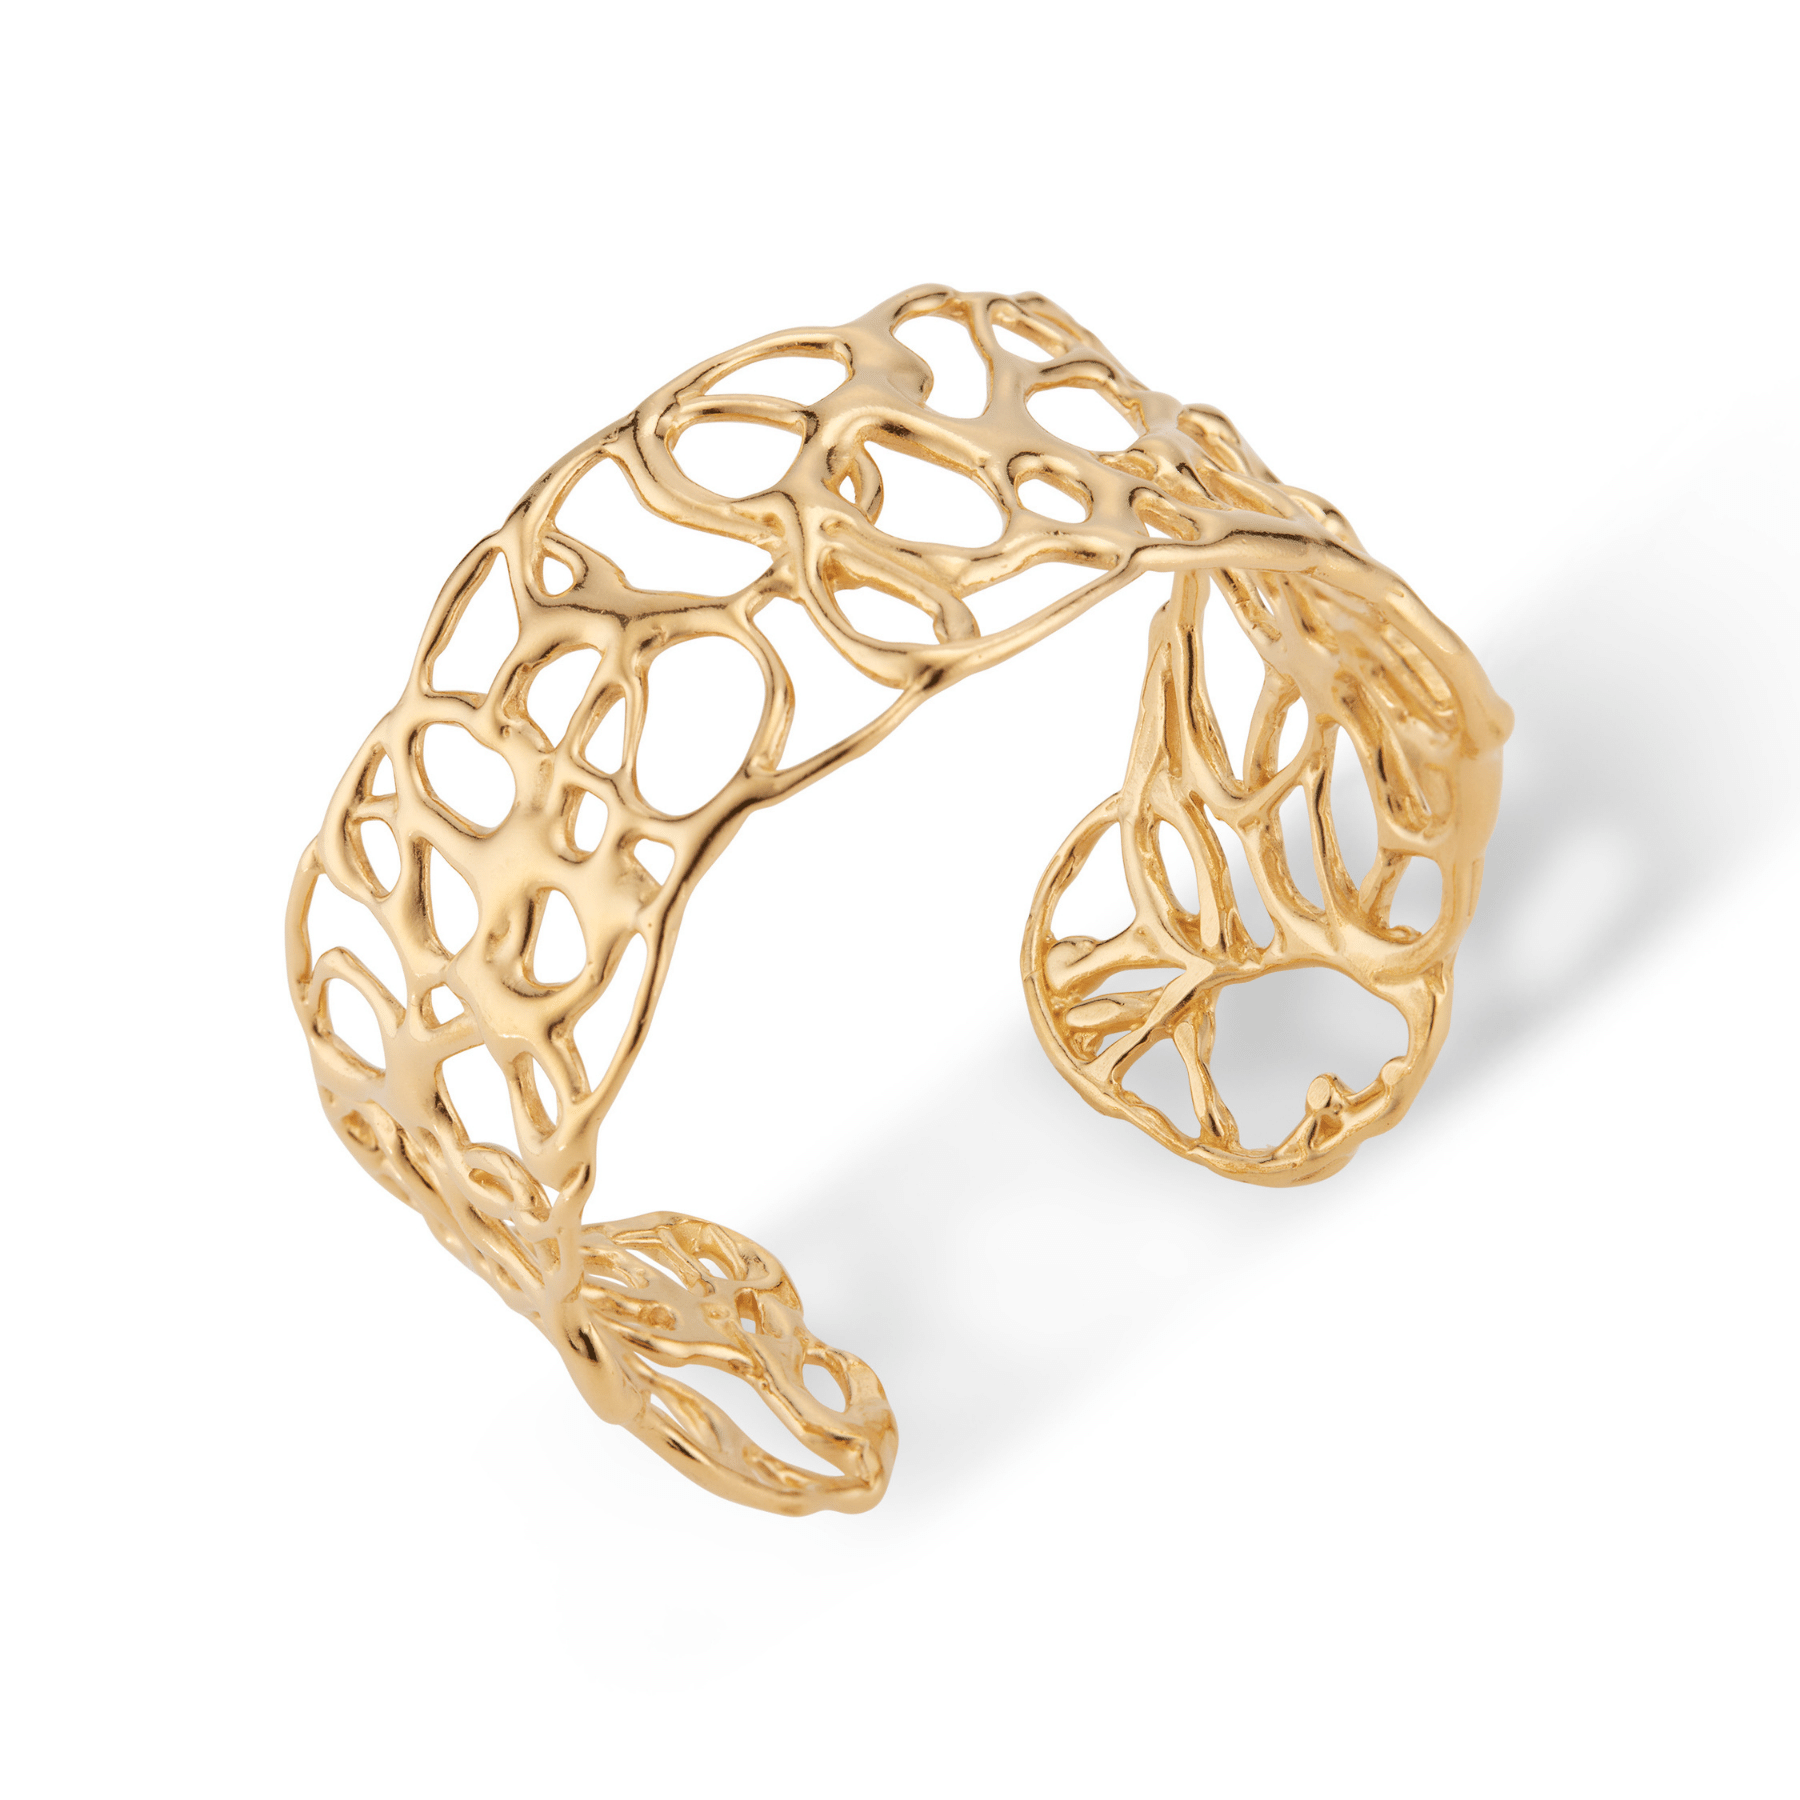 Abstract squiggle wide cuff bracelet in 18k gold vermeil.